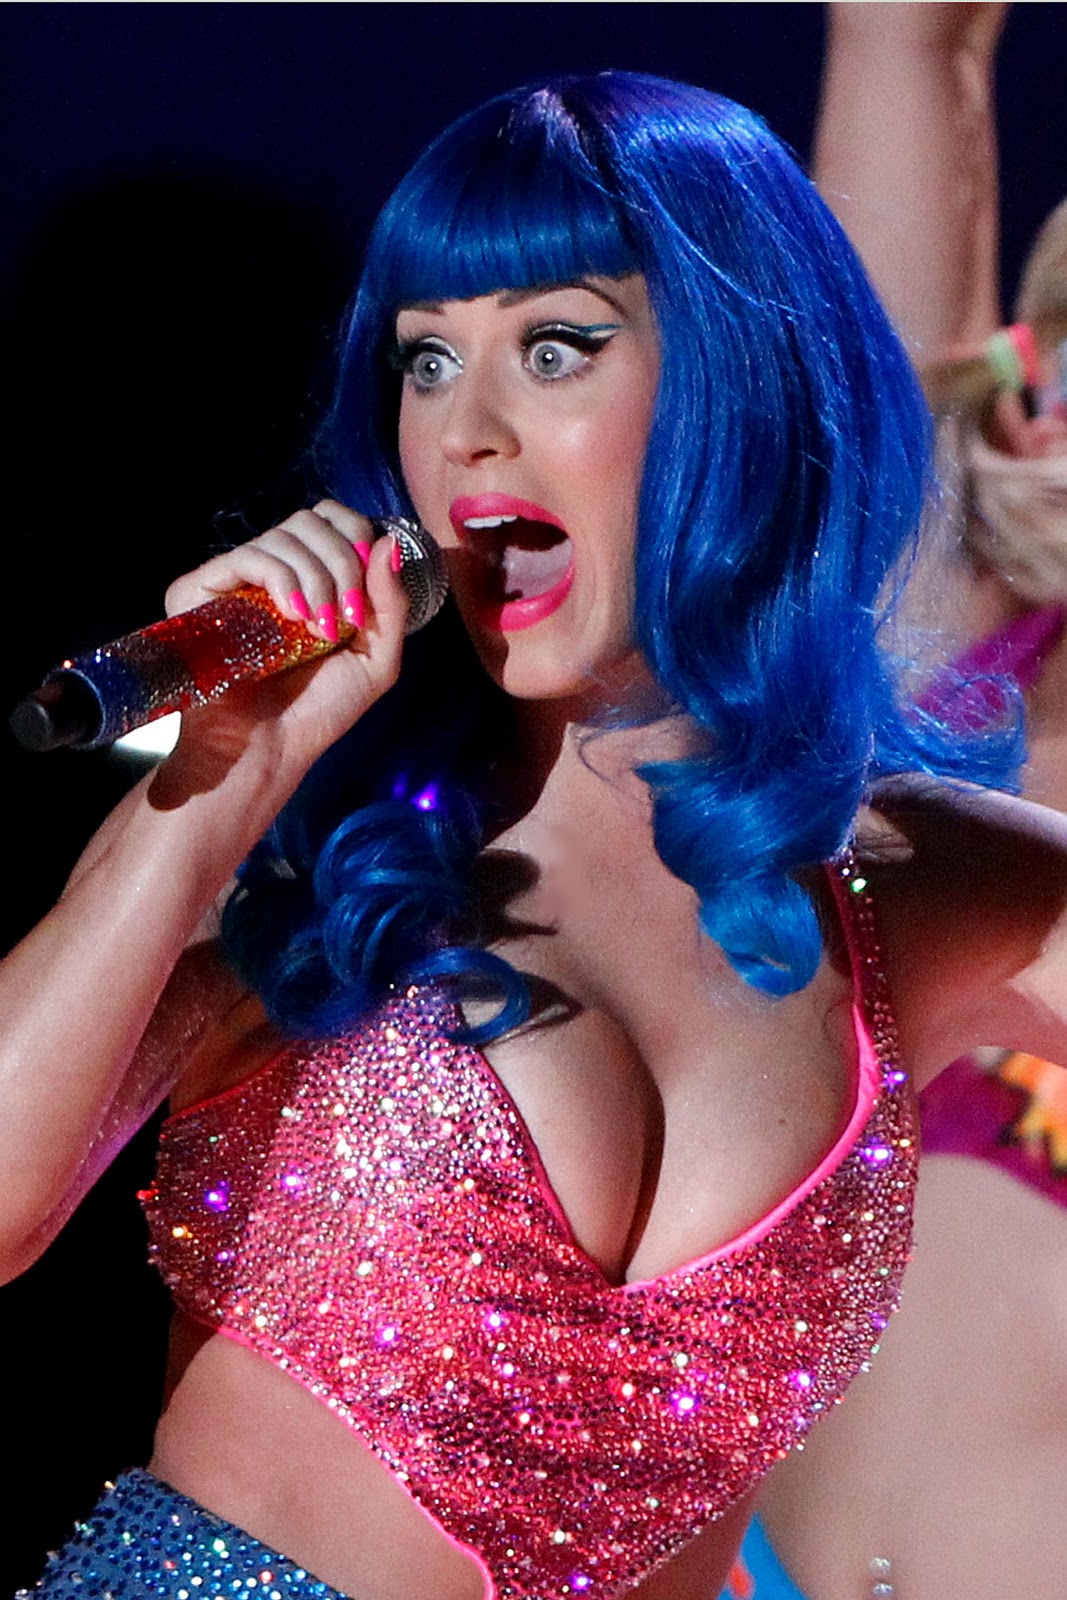 Katy Perry muchas fotos